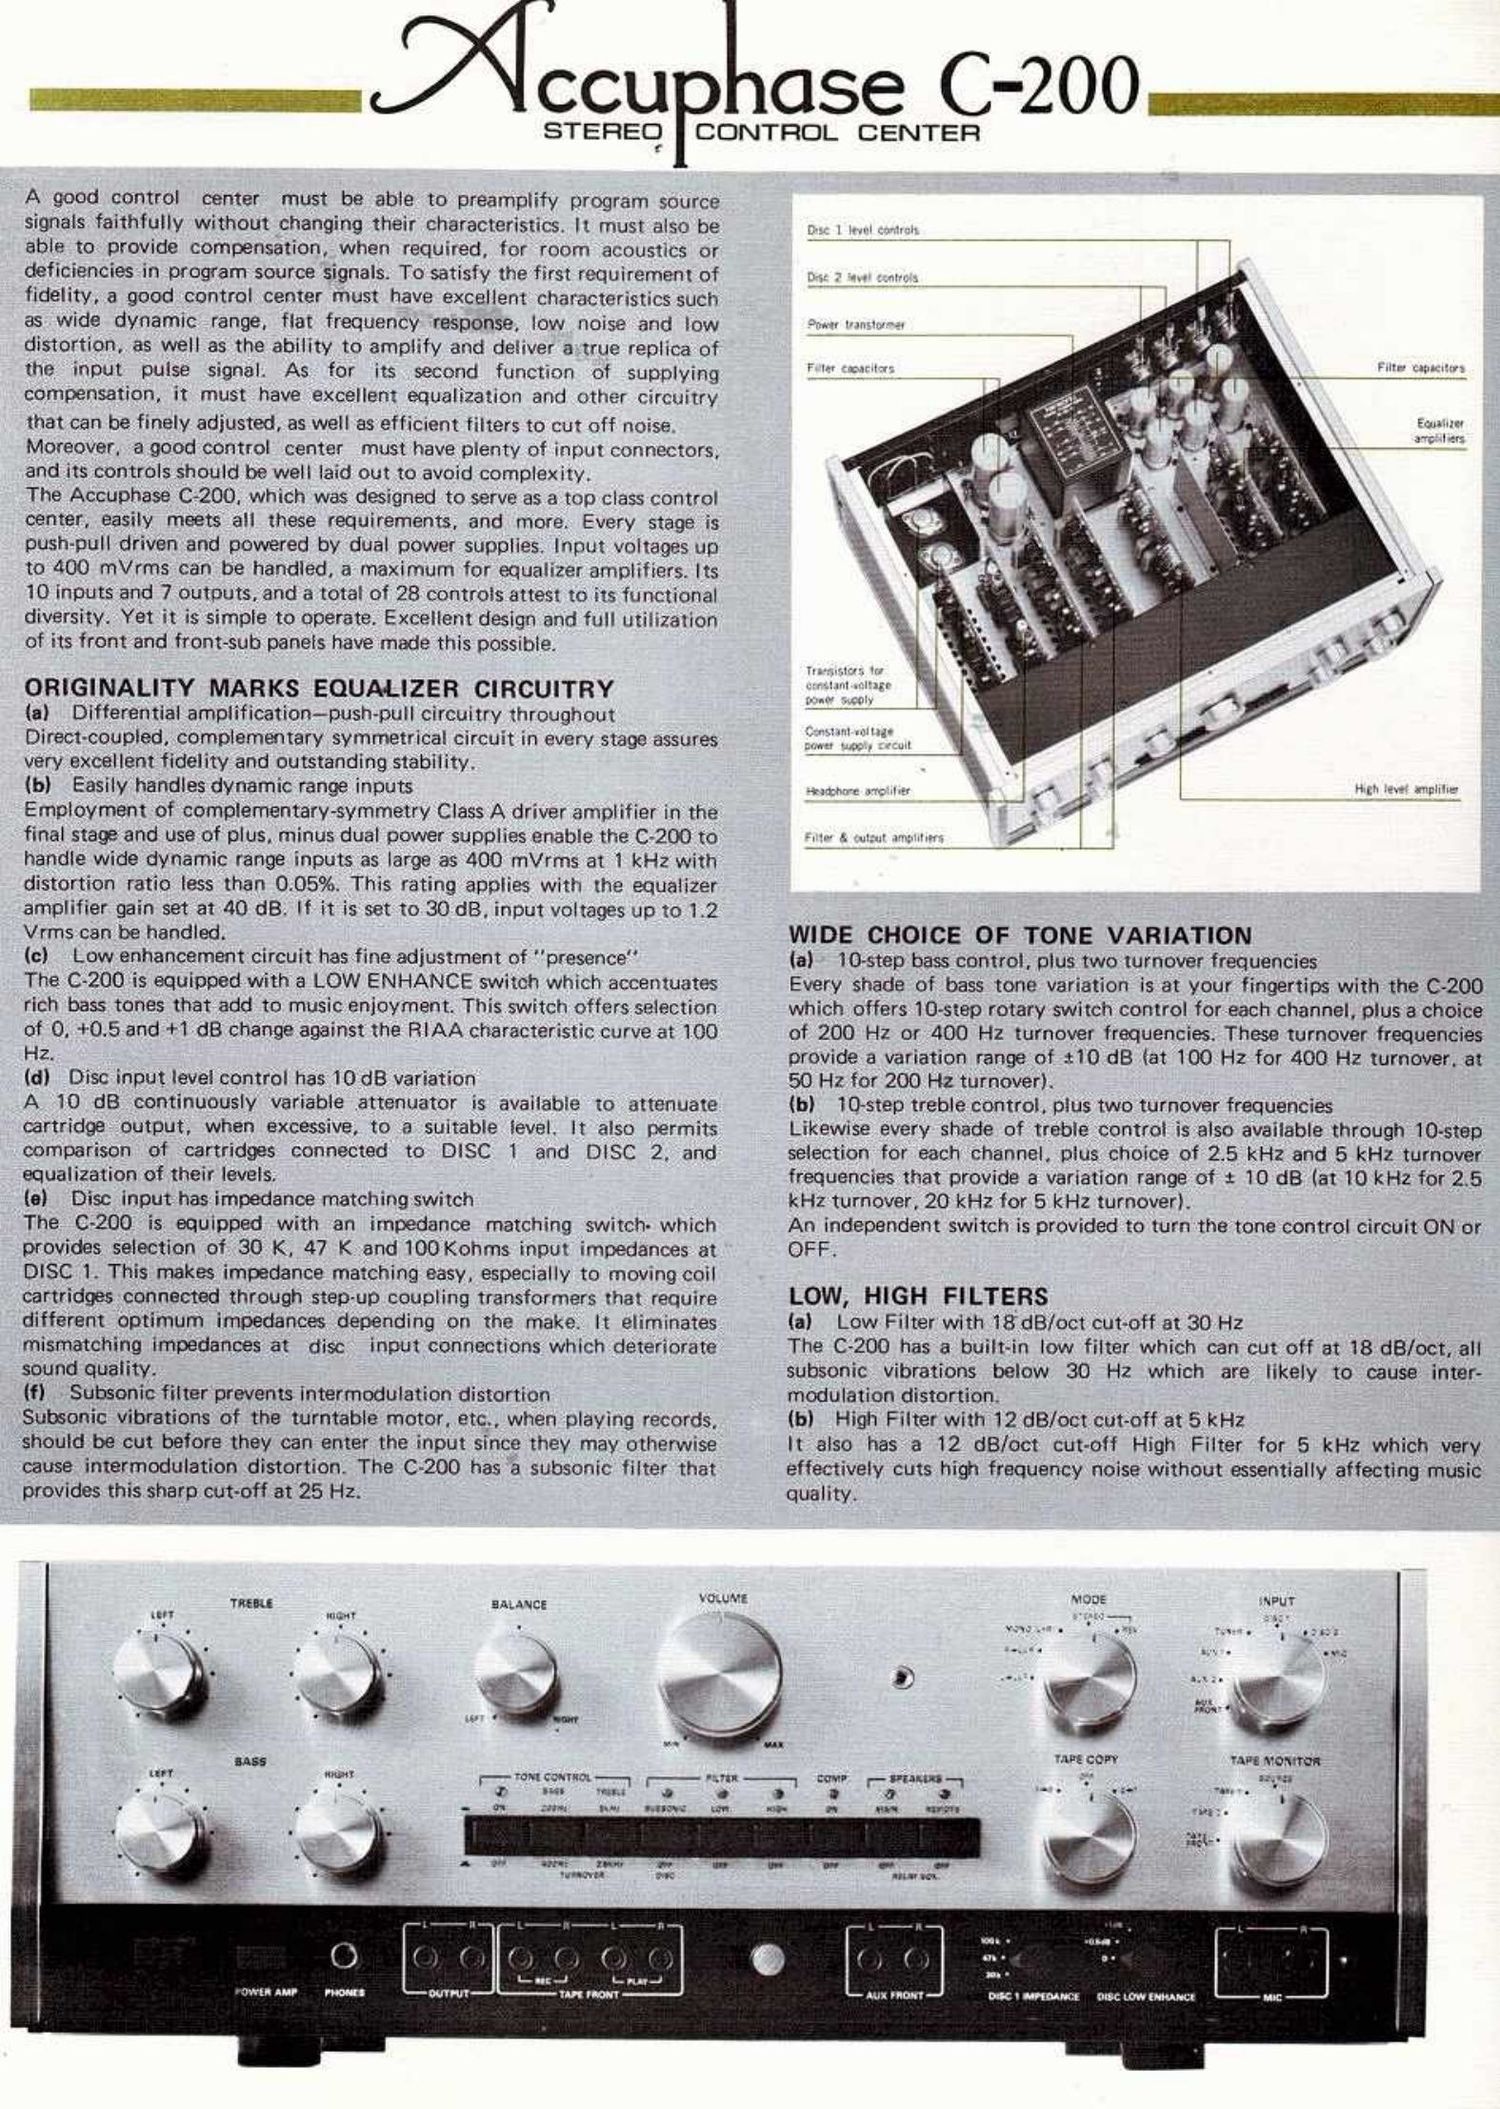 accuphase c 200 brochure